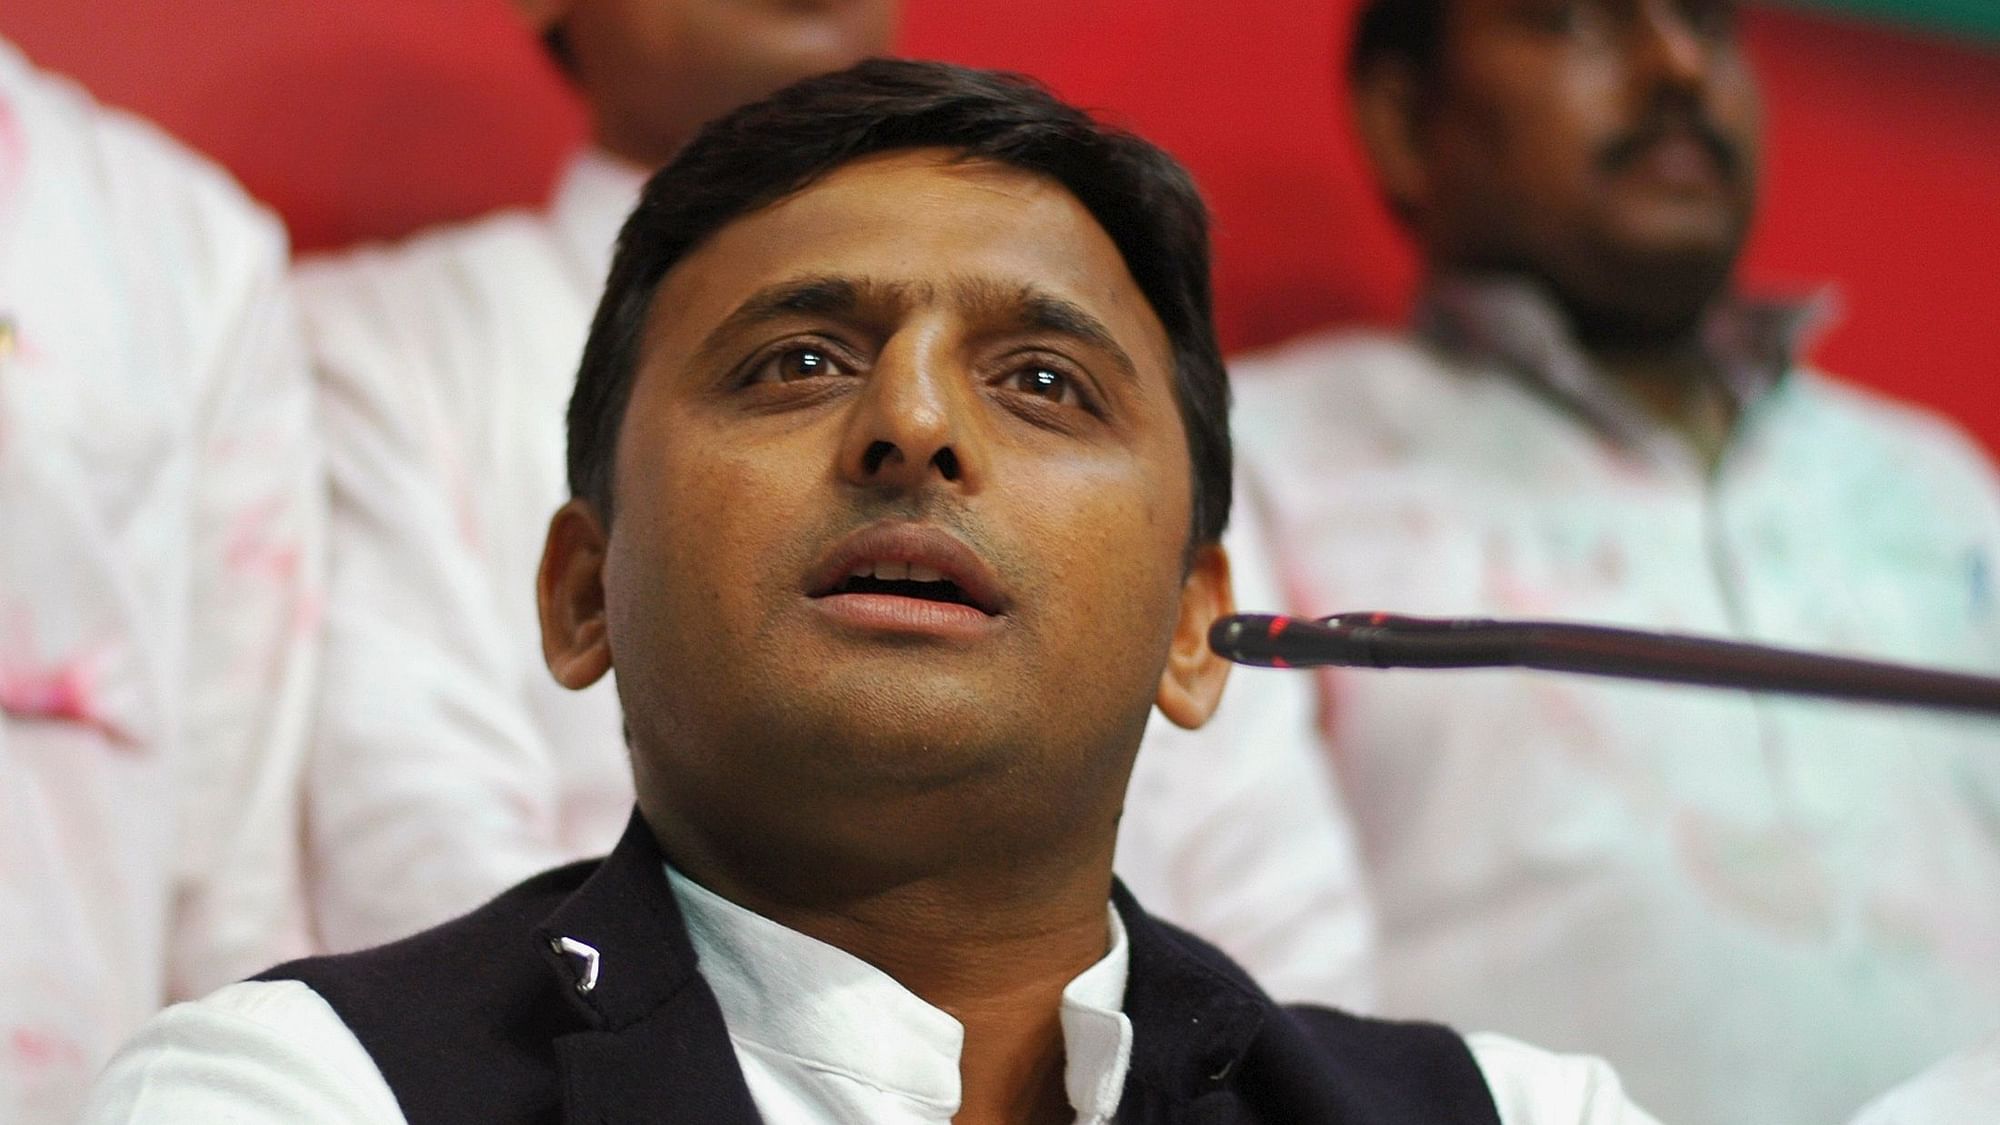 Samajwadi Party chief Akhilesh Yadav on Friday said that in a democracy, it was a “fundamental right” to ask questions of politicians.